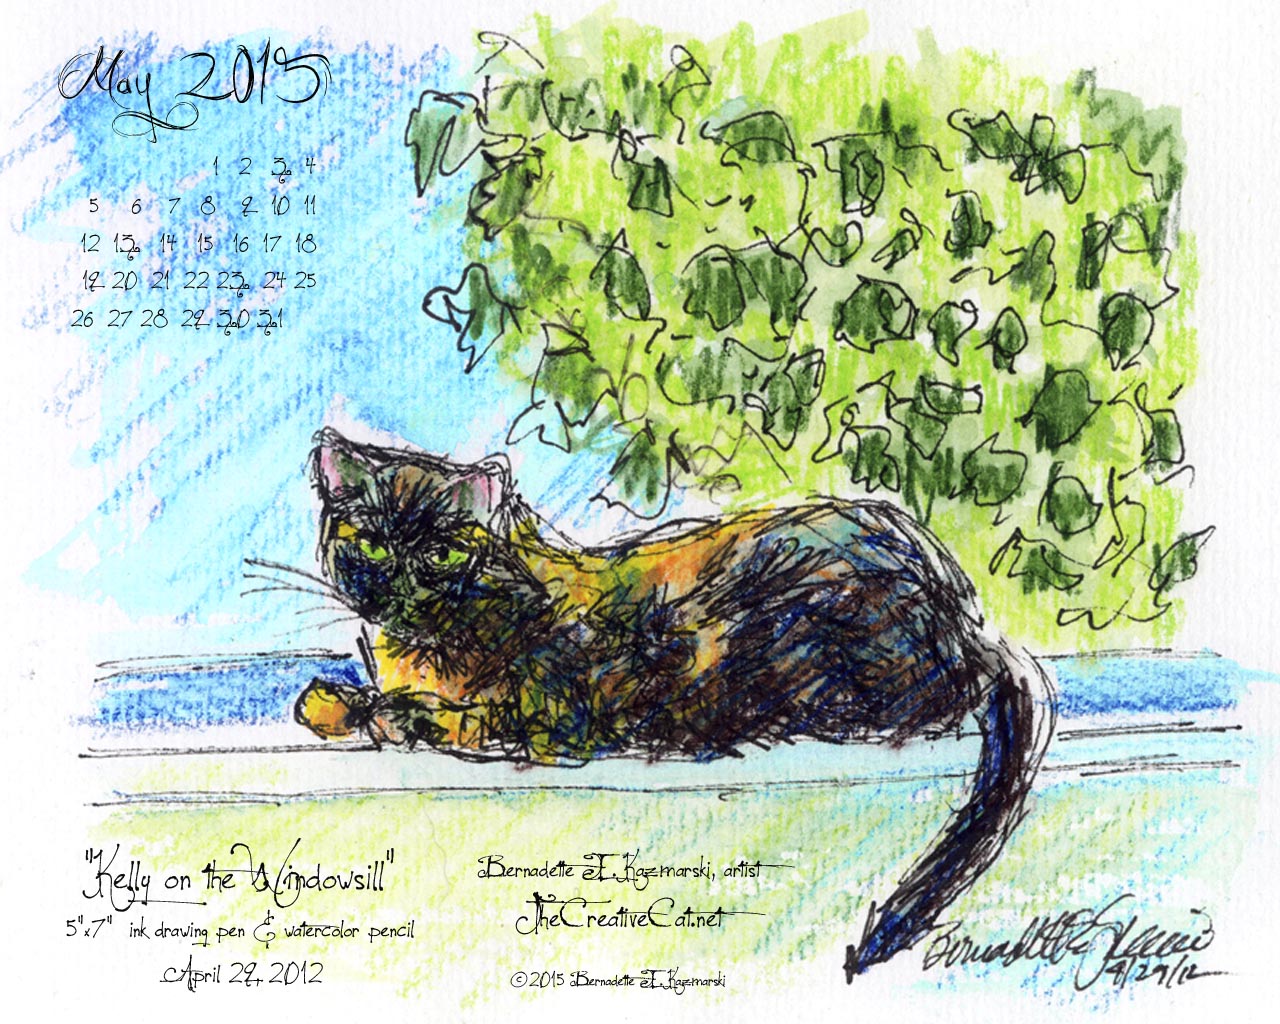 "Kelly on the Windowsill" desktop calendar, 1280 x 1024 for square and laptop monitors.